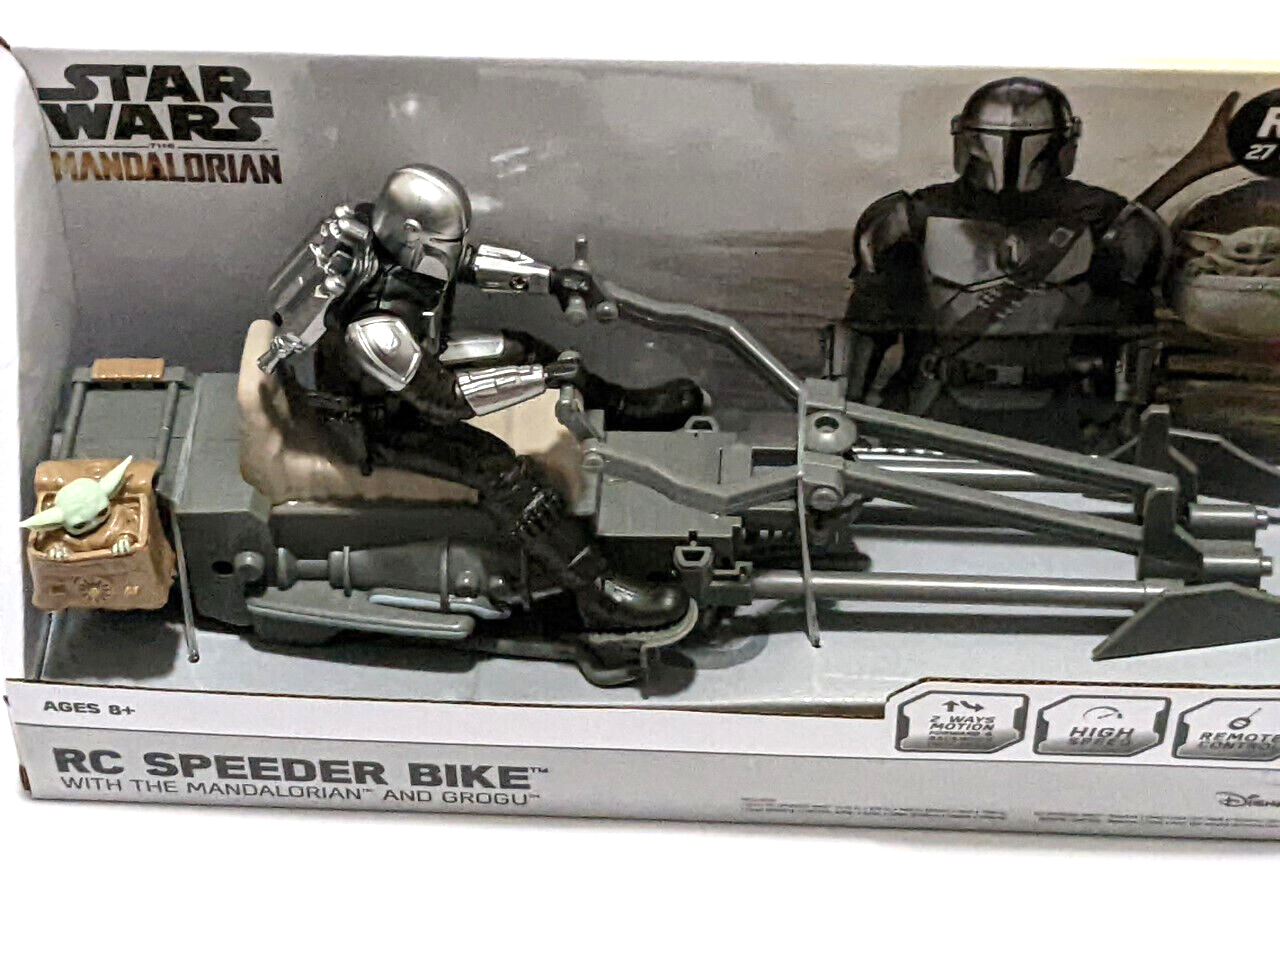 Star Wars The Mandalorian RC Speeder Bike - Remote Control Vehicle for Boys, Age 8+